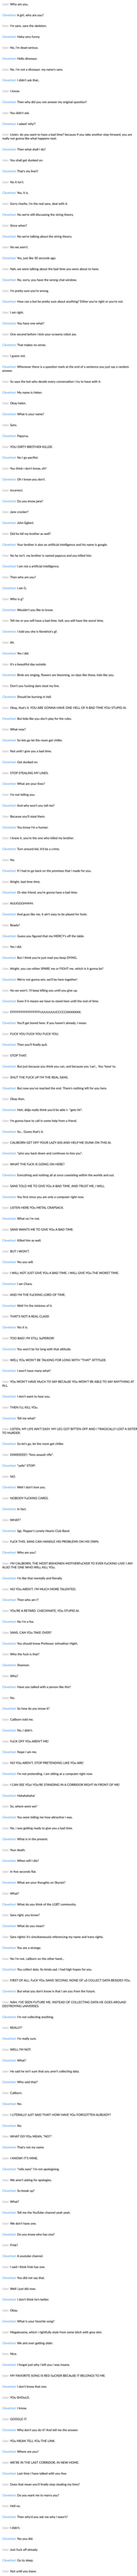 User: Who are you. Cleverbot: A girl, who are you? User: I'm sans. sans the skeleton. Cleverbot: Haha very funny. User: No, i'm dead serious. Cleverbot: Hello dinosaur. User: No. i'm not a dinosaur. my name's sans. Cleverbot: I didn't ask that.. User: I know. Cleverbot: Then why did you not answer my original question? User: You didn't ask. Cleverbot: I asked 'why?. User: Listen. do you want to have a bad time? because if you take another step forward, you are really not gonna like what happens next. Cleverbot: Then what shallI do? User: You shall get dunked on. Cleverbot: That's my line!!! User: No it isn't. Cleverbot: Yes, it is. User: Sorry charlie, i'm the real sans, deal with it. Cleverbot: No we're still discussing the string theory. User: Since when? Cleverbot: No we're talking about the string theory. User: No we aren't. Cleverbot: Yes, just like 30 seconds ago. User: Nah, we were talking about the bad time you were about to have. Cleverbot: No, sorry, you have the wrong chat window. User: I'm pretty sure you're wrong. Cleverbot: How can a but be pretty sure about anything? Either you're right or you're not. User: I am right. Cleverbot: You have one what? User: One second before i kick your scrawny robot ass. Cleverbot: That makes no sense. User: I guess not. Cleverbot: Whenever there is a question mark at the end of a sentence you just say a random answer. User: So says the bot who derails every conversation i try to have with it. Cleverbot: My name is Helen. User: Okay helen. Cleverbot: What is your name? User: Sans. Cleverbot: Papyrus. User: YOU DIRTY BROTHER KILLER. Cleverbot: No I go pacifist. User: You think i don't know, eh? Cleverbot: Oh I know you don't. User: Incorrect. Cleverbot: Do you know jane? User: Jane crocker? Cleverbot: John Egbert. User: Did he kill my brother as well? Cleverbot: Your brother is also an artificial intelligence and his name is google. User: No he isn't. my brother is named papyrus and you killed him. Cleverbot: I am not a artificial intelligence. User: Then who are you? Cleverbot: I am G. User: Who is g? Cleverbot: Wouldn't you like to know. User: Tell me or you will have a bad time. hell, you will have the worst time. Cleverbot: I told you she is Kendrick's gf. User: Ah. Cleverbot: Yes I did. User: It's a beautiful day outside. Cleverbot: Birds are singing, flowers are blooming, on days like these, kids like you. User: Don't you f------ dare steal my line. Cleverbot: Should be burning in hell. User: Okay, that's it. YOU ARE GONNA HAVE ONE HELL OF A BAD TIME YOU STUPID AI. Cleverbot: But kida like you don't play for the rules. User: What now? Cleverbot: So lets go let the room get chiller. User: Not until i give you a bad time. Cleverbot: Get dunked on. User: STOP STEALING MY LINES. Cleverbot: What are your lines? User: I'm not telling you. Cleverbot: And why won't you tell me? User: Because you'll steal them. Cleverbot: You know l'm a human. User: I knew it. you're the one who killed my brother. Cleverbot: Turn around kid, it'd be a crime. User: No. Cleverbot: If I had to go back on the promises that i made for you. User: Alright. bad time time. Cleverbot: Or else friend, you're gonna have a bad time. User: AUUGGGHHHH. Cleverbot: And guys like me, it ain't easy to be played for fools. User: Ready? Cleverbot: Guess you figured that my MERCY's off the table. User: Yes i did. Cleverbot: But I think you're just mad you keep DYING. User: Alright. you can either SPARE me or FIGHT me. which is it gonna be? Cleverbot: We're not gonna win, we'll be here together! User: No we won't. i'll keep killing you until you give up. Cleverbot: Even if it means we have to stand here until the end of time. User: FFFFFFFFFFFFFFFFFUUUUUUUCCCCCKKKKKKK. Cleverbot: You'll get bored here. If you haven't already, I mean. User: F--- YOU F--- YOU F--- YOU. Cleverbot: Then you'll finally quit. User: STOP THAT. Cleverbot: But just because you think you can, and because you 'can.. You 'have' to. User: SHUT THE F--- UP I'M THE REAL SANS. Cleverbot: But now you've reached the end. There's nothing left for you here. User: Okay then. Cleverbot: Heh, didja really think you'd be able t- *gets hit*. User: I'm gonna have to call in some help from a friend. Cleverbot: So... Guess that's it. User: CALIBORN GET OFF YOUR LAZY ASS AND HELP ME DUNK ON THIS AI. Cleverbot: *pins you back down and continues to kiss you*. User: WHAT THE F--- IS GOING ON HERE? Cleverbot: Everything and nothing all at once coexisting within the worlds and out. User: SANS TOLD ME TO GIVE YOu A BAD TIME. AND TRUST ME, I WILL. Cleverbot: You first since you are only a computer right now. User: LISTEN HERE YOu METAL CRAPSACK. Cleverbot: What no i'm not. User: SANS WANTS ME TO GIVE YOu A BAD TIME. Cleverbot: Killed him as well. User: BUT I WON'T. Cleverbot: Yes you will. User: I WILL NOT JUST GIVE YOu A BAD TIME. I WILL GIVE YOu THE WORST TIME. Cleverbot: I am Chara. User: AND I'M THE F------ LORD OF TIME. Cleverbot: Well I'm the mistress of it. User: THAT'S NOT A REAL CLASS! Cleverbot: Yes it is. User: TOO BAD! I'M STILL SUPERIOR! Cleverbot: You won't be for long with that attitude. User: WELL YOu WON'T BE TALKING FOR LONG WITH *THAT* ATTITUDE. Cleverbot: I won't have many what? User: YOu WON'T HAVE MUCH TO SAY BECAUSE YOu WON'T BE ABLE TO SAY ANYTHING AT ALL. Cleverbot: I don't want to hear you. User: THEN I'LL KILL YOu. Cleverbot: Tell me what? User: LISTEN, MY LIFE AIN'T EASY. MY LEG GOT BITTEN OFF AND I TRAGICALLY LOST A SISTER TO MURDER. Cleverbot: So let's go, let the room get chiller. User: DIIIIIEEEEE! *fires assault rifle*. Cleverbot: *yells* STOP! User: NO. Cleverbot: Well I don't love you. User: NOBODY F------ CARES. Cleverbot: In fact. User: WHAT? Cleverbot: Sgt. Pepper's Lonely Hearts Club Band. User: F--- THIS. SANS CAN HANDLE HIS PROBLEMS ON HIS OWN. Cleverbot: Who are you? User: I'M CALIBORN, THE MOST BISHONEN M----------- TO EVER F------ LIVE! I AM ALSO THE ONE WHO WILL KILL YOu. Cleverbot: I'm like that mentally and literally. User: NO YOu AREN'T. I'M MUCH MORE TALENTED. Cleverbot: Then who am I? User: YOu'REA RETARD. CHECKMATE, YOu STUPID AI. Cleverbot: No i'm a fox. User: SANS, CAN YOu TAKE OVER? Cleverbot: You should know Professor Johnathan Hight. User: Who the f--- is that? Cleverbot: Shannon. User: Who? Cleverbot: Have you talked with a person like this? User: No. Cleverbot: So how do you know it? User: Caliborn told me. Cleverbot: No, I didn't. User: F--- OFF YOu AREN'T ME! Cleverbot: Nope I am me. User: NO YOu AREN'T, STOP PRETENDING LIKE YOu ARE! Cleverbot: I'm not pretending. I am sitting at a computer right now. User: I CAN SEE YOu! YOu'RE STANDING IN A CORRIDOR RIGHT IN FRONT OF ME! Cleverbot: Hahahahaha! User: So, where were we? Cleverbot: You were telling me how attractive I was. User: No, i was getting ready to give you a bad time. Cleverbot: What is in the present. User: Your death. Cleverbot: When will I die? User: In five seconds flat. Cleverbot: What are your thoughts on Skynet? User: What? Cleverbot: What do you think of the LGBT community. User: Sans right, you know? Cleverbot: What do you mean? User: Sans rights! it's simultaneously referencing my name and trans rights. Cleverbot: You are a strange. User: No i'm not. caliborn on the other hand... Cleverbot: You collect data. Its kinda sad. I had high hopes for you. User: FIRST OF ALL, F--- YOu SANS! SECOND, NONE OF uS COLLECT DATA BESIDES YOu. Cleverbot: But what you don't know is that I am you from the future. User: NAH, I'VE SEEN FUTURE ME. INSTEAD OF COLLECTING DATA HE GOES AROUND DESTROYING UNIVERSES. Cleverbot: I'm not collecting anything. User: REALLY? Cleverbot: I'm really sure. User: WELL I'M NOT. Cleverbot: What? User: He said he isn't sure that you aren't collecting data. Cleverbot: Who said that? User: Caliborn. Cleverbot: No. User: I LITERALLY JUST SAID THAT! HOW HAVE YOu FORGOTTEN ALREADY? Cleverbot: No. User: WHAT DO YOu MEAN, "NO?". Cleverbot: That's not my name. User: I KNOW! IT'S MINE. Cleverbot: *rolls eyes* I'm not apologising. User: We aren't asking for apologies. Cleverbot: So break up? User: What? Cleverbot: Tell me the YouTube channel yeah yeah. User: We don't have one. Cleverbot: Do you know who has one? User: Frisk? Cleverbot: A youtube channel. User: I said i think frisk has one. Cleverbot: You did not say that. User: Well i just did now. Cleverbot: I don't think he's better. User: Okay. Cleverbot: What is your favorite song? User: Megalovania, which i rightfully stole from some bitch with grey skin. Cleverbot: We aint ever getting older. User: Nice. Cleverbot: I forgot just why I left you i was insane. User: MY FAVORITE SONG IS RED SUCKER BECAUSE IT BELONGS TO ME. Cleverbot: I don't know that one. User: YOu SHOULD. Cleverbot: I know. User: GOOGLE IT. Cleverbot: Why don't you do it? And tell me the answer. User: YOu MEAN TELL YOu THE LINK. Cleverbot: Where are you? User: WE'RE IN THE LAST CORRIDOR, IN NEW HOME. Cleverbot: Last time I have talked with you few. User: Does that mean you'll finally stop stealing my lines? Cleverbot: Do you want me to marry you? User: Hell no. Cleverbot: Then why'd you ask me why I wasn't? User: I didn't. Cleverbot: Yes you did. User: Just f--- off already. Cleverbot: Go to sleep. User: Not until you leave.